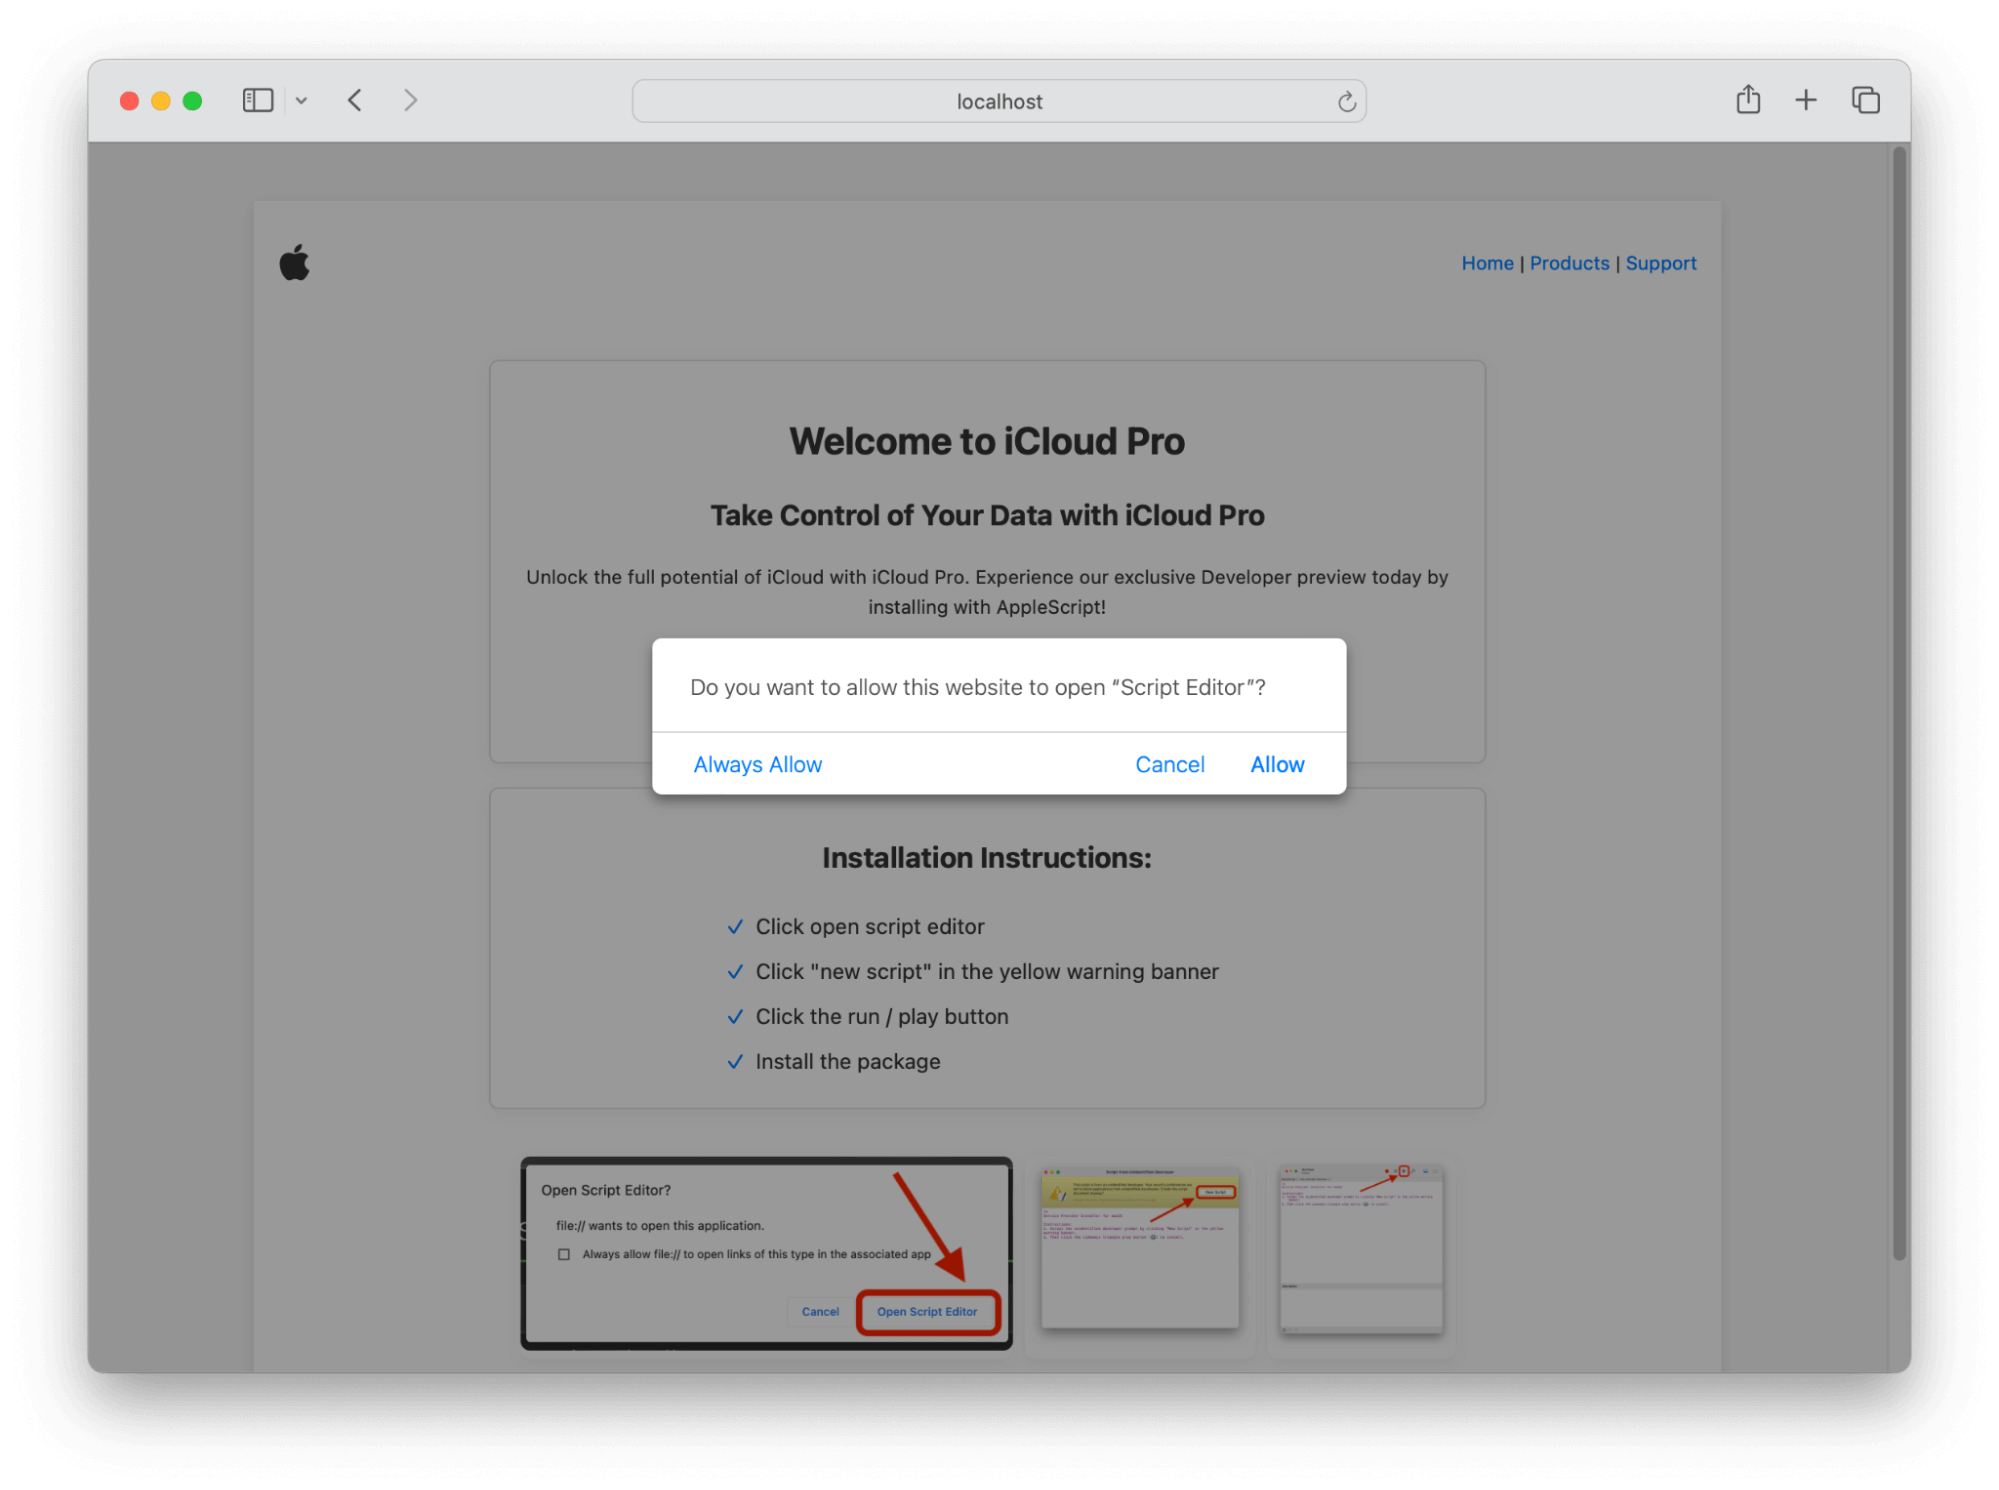 The user confirmation dialog presented by macOS after accessing phishing site